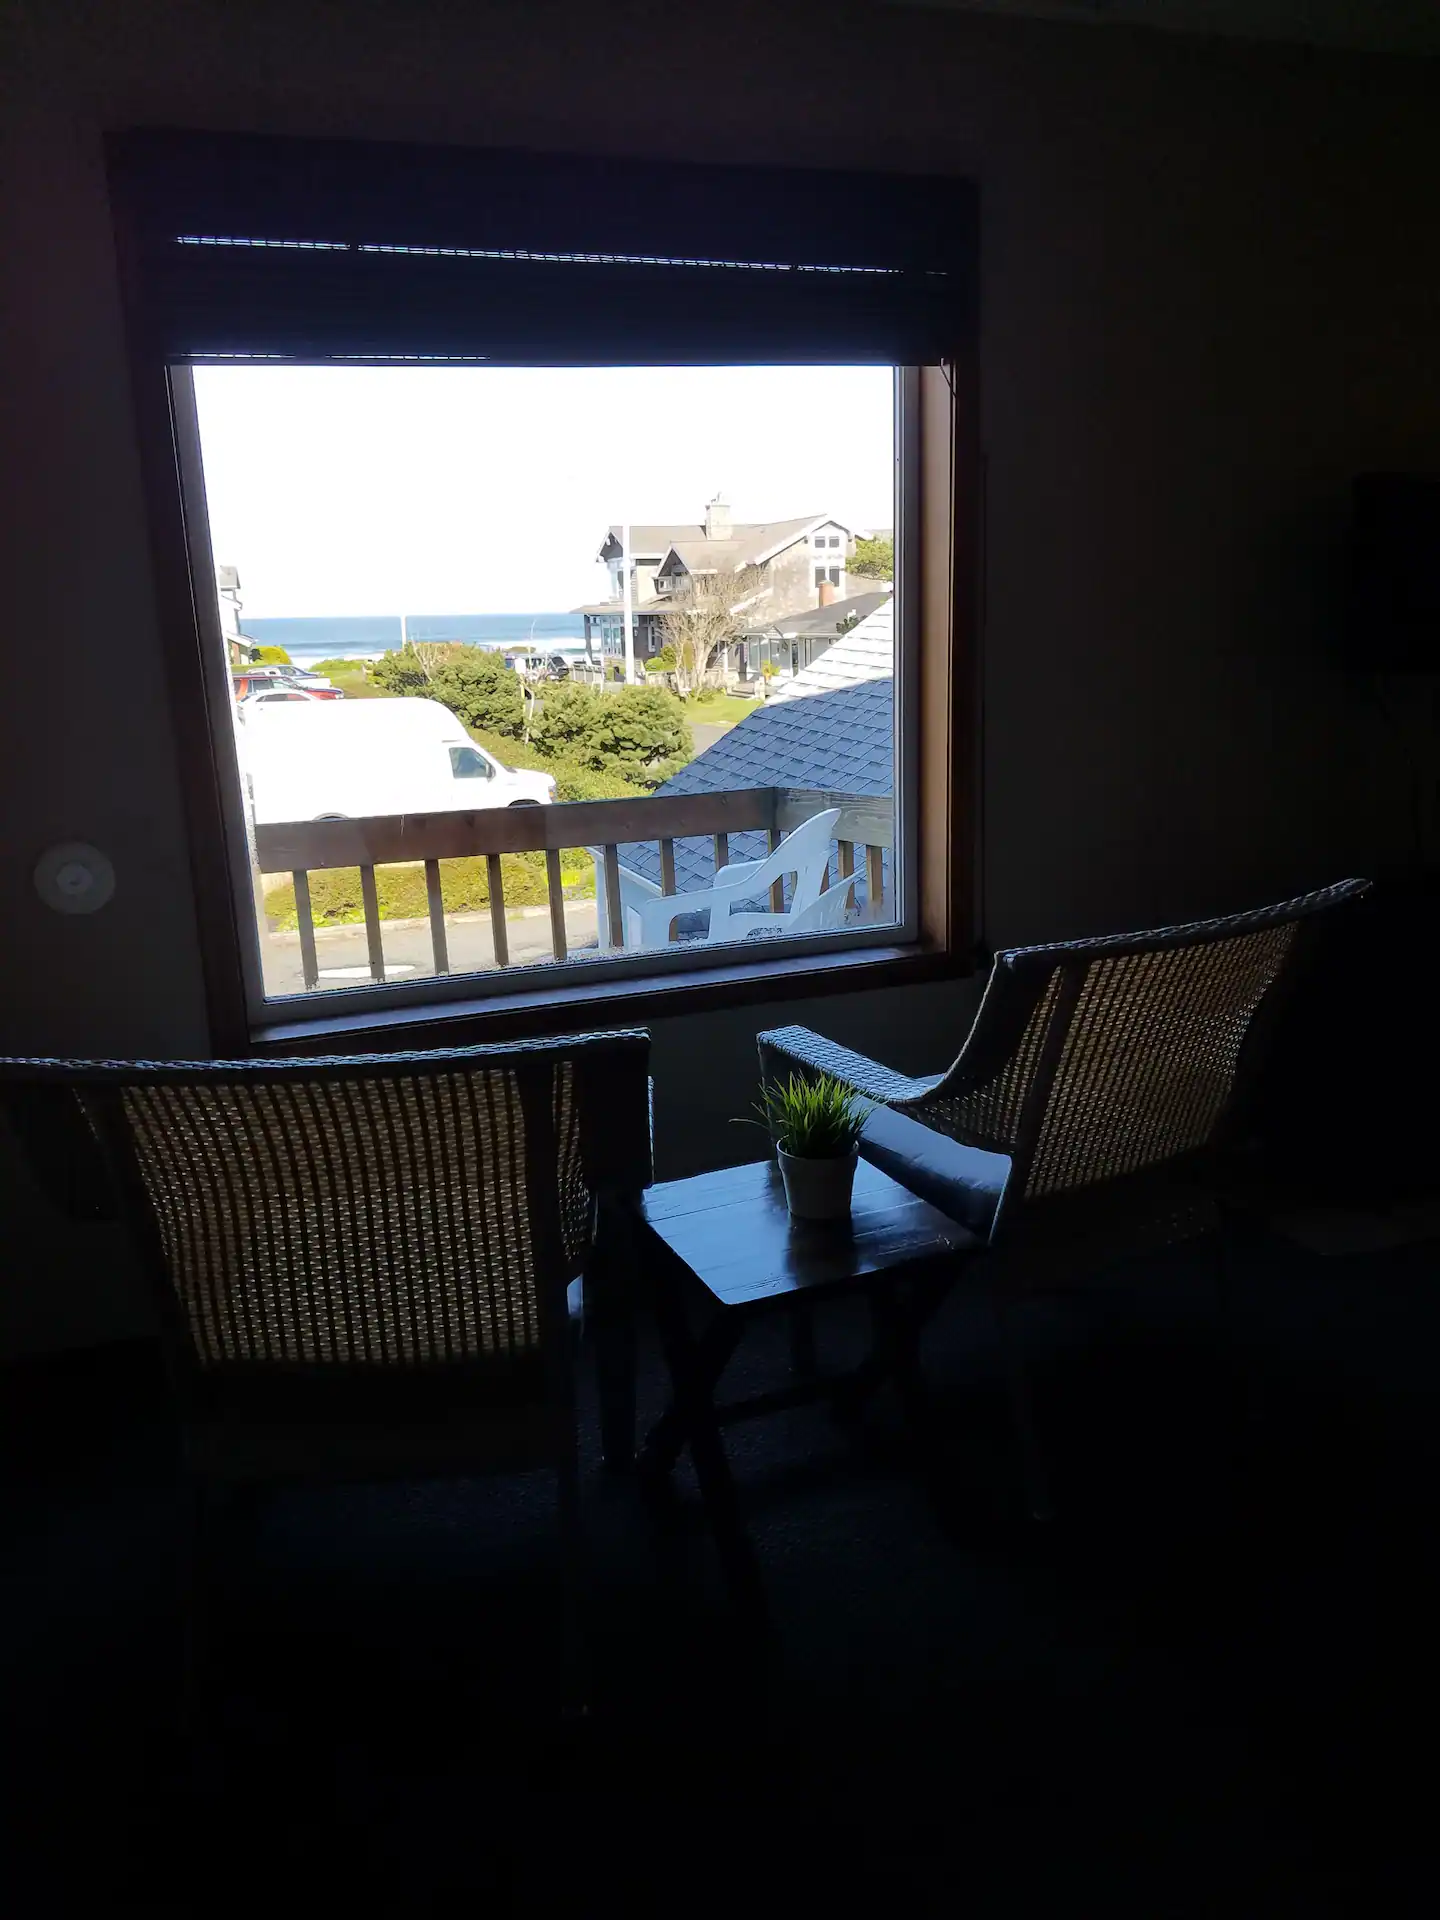 Beautiful view of the beach from inside The Lighthouse getaway home